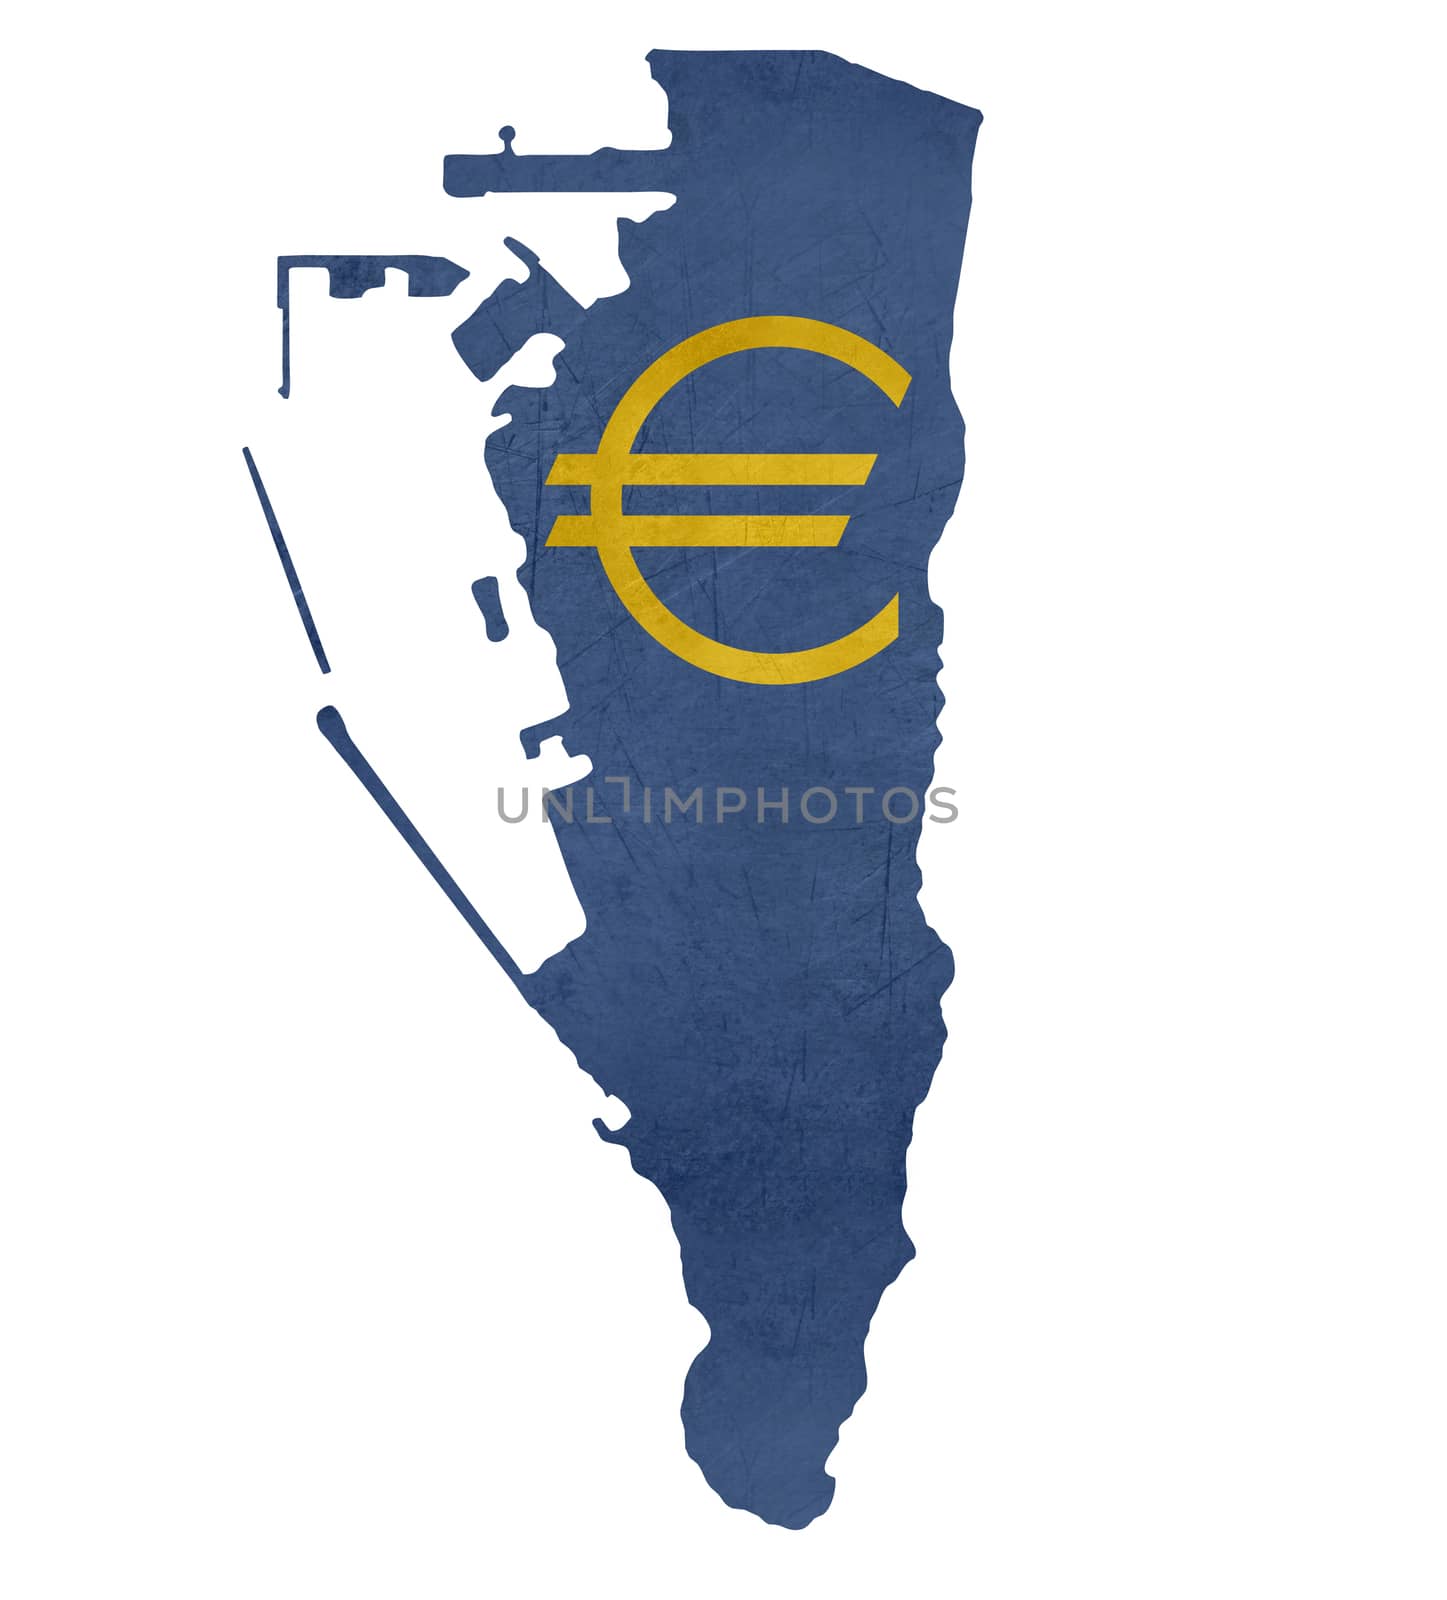 European currency symbol on map of Gibraltar isolated on white background.